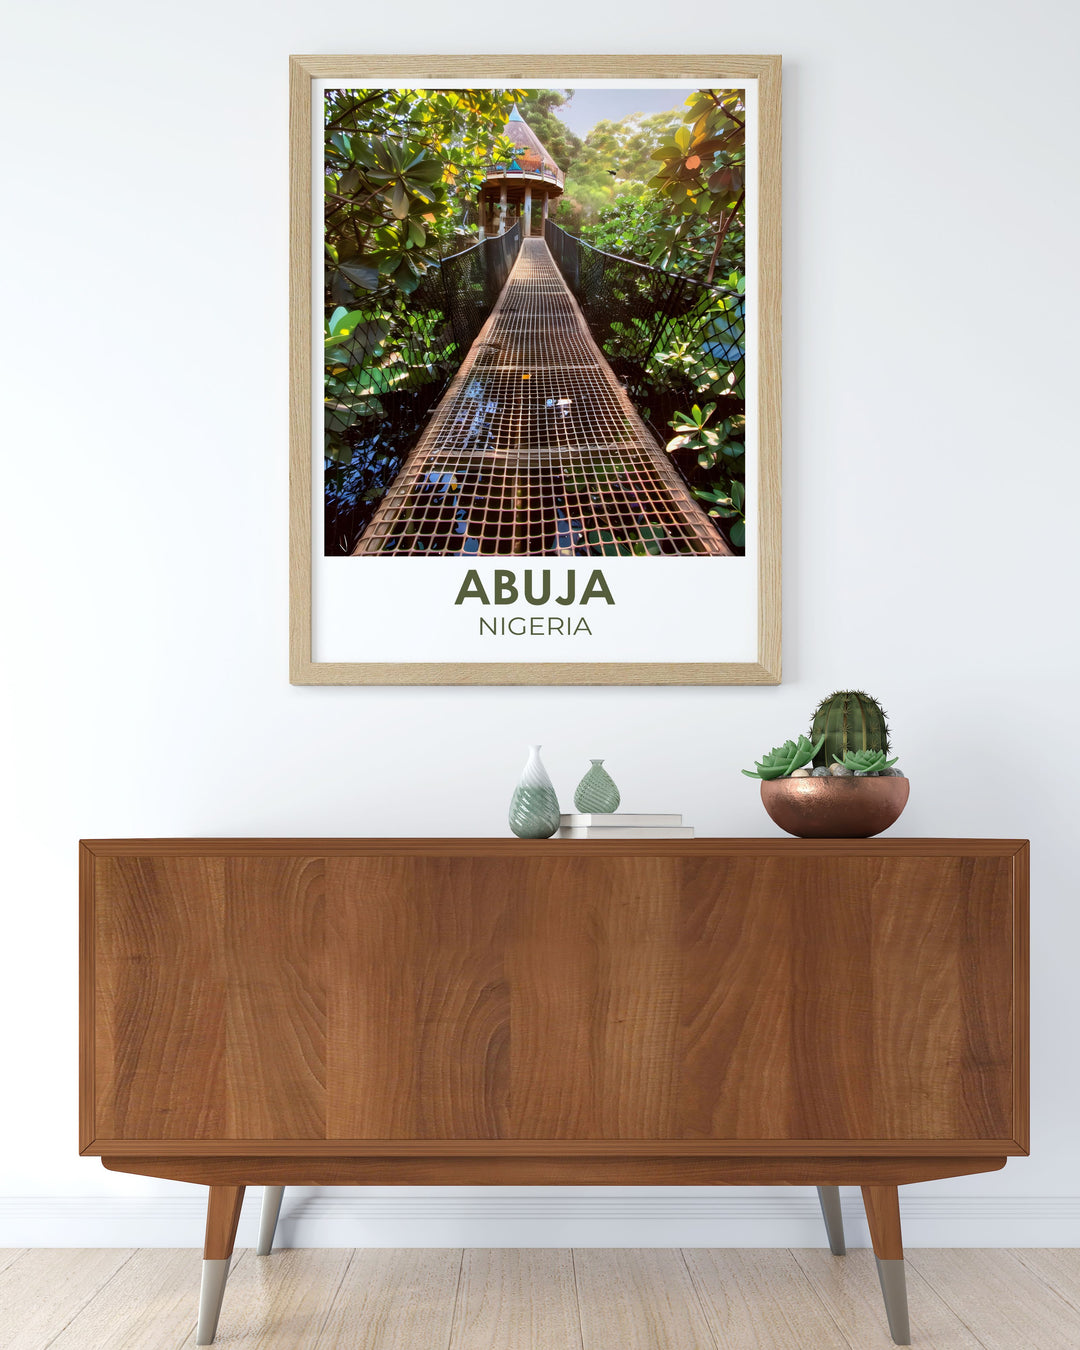 Nigeria Poster featuring Lekki Conservation Centre highlighting the natural beauty and cultural significance of this location perfect for personalized gifts travel enthusiasts and anyone looking to enhance their home decor with a unique art print